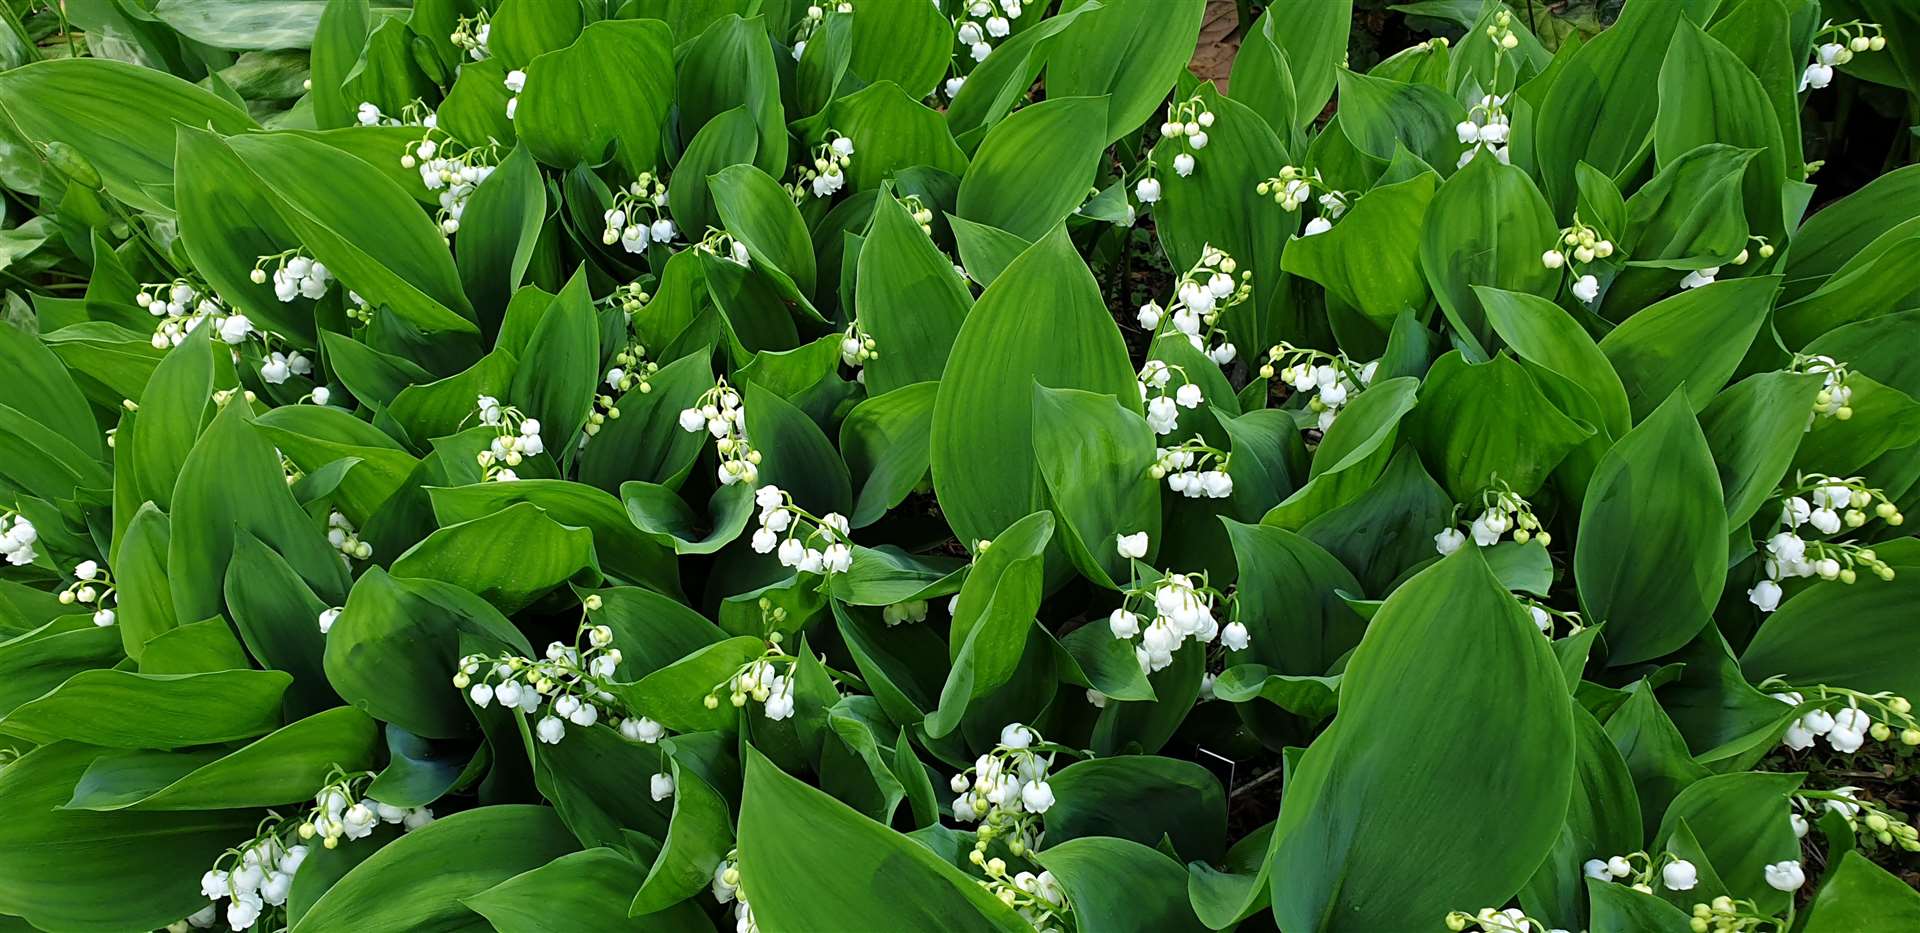 Lily of the valley, one of the Queen’s favourite flowers (Buckingham Palace/PA)